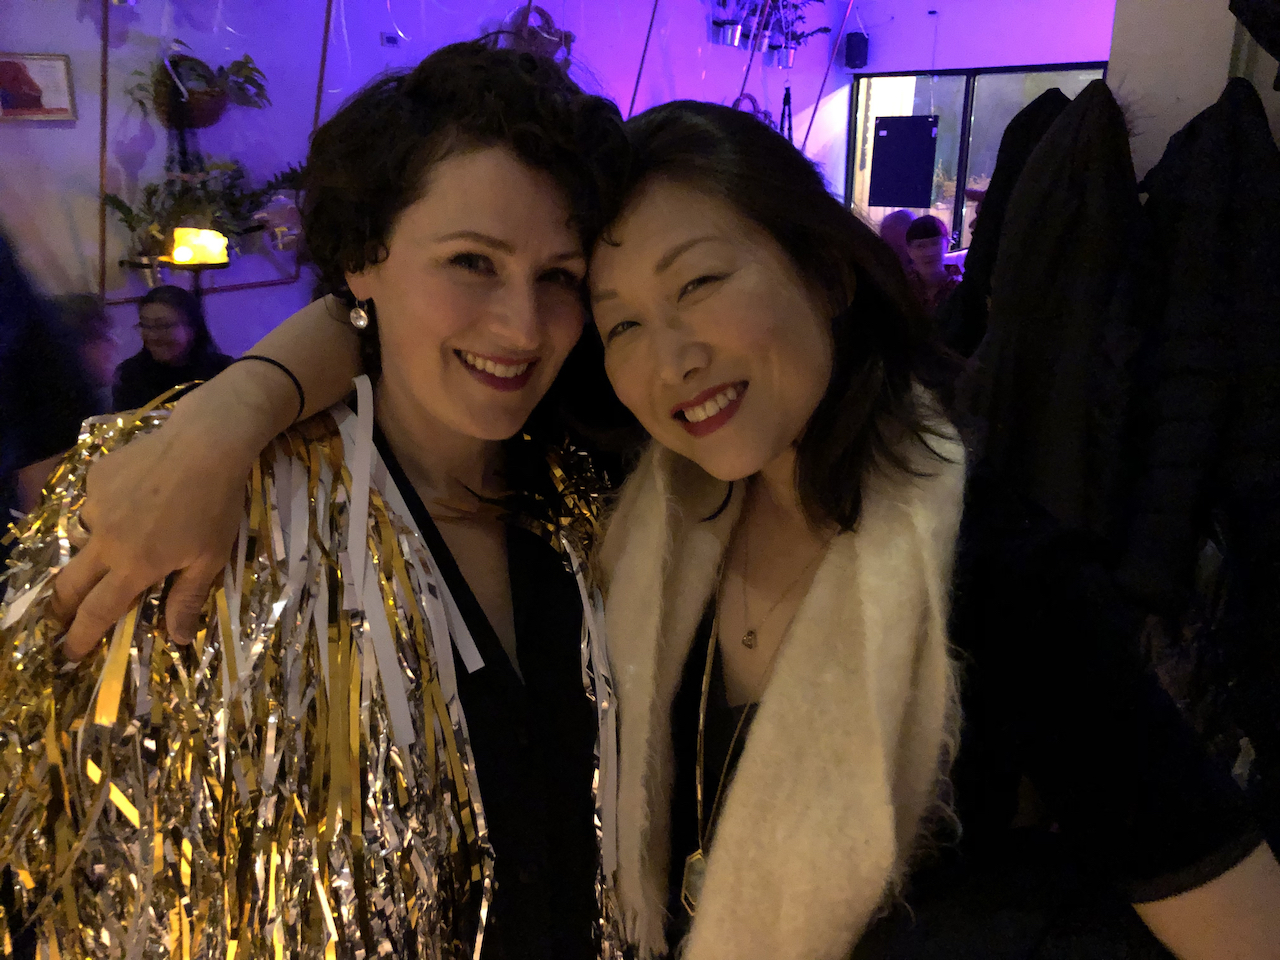 A photo of two smiling women in party clothes against a purple light